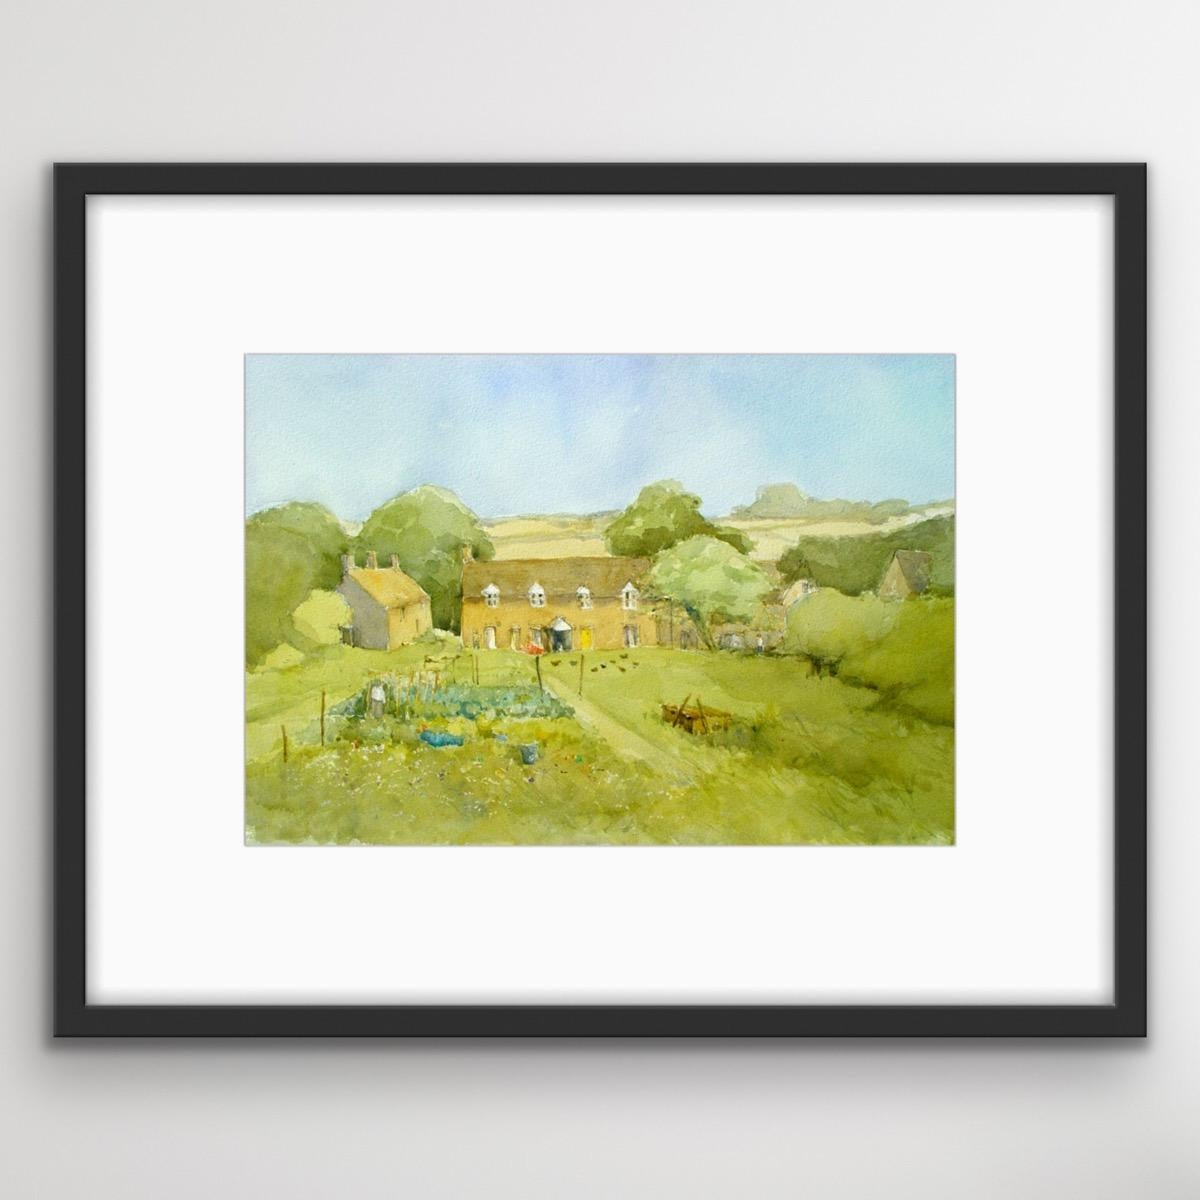 Elizabeth Chalmers. Watercolour painting of cottages and gardens in the Cotswold village of Sherbourne.

Size: H:29.00 cm x W:44.50 cm.

Artist Bio:  Elizabeth Chalmers was born in Northern Ireland, where she studied art and design at Belfast before